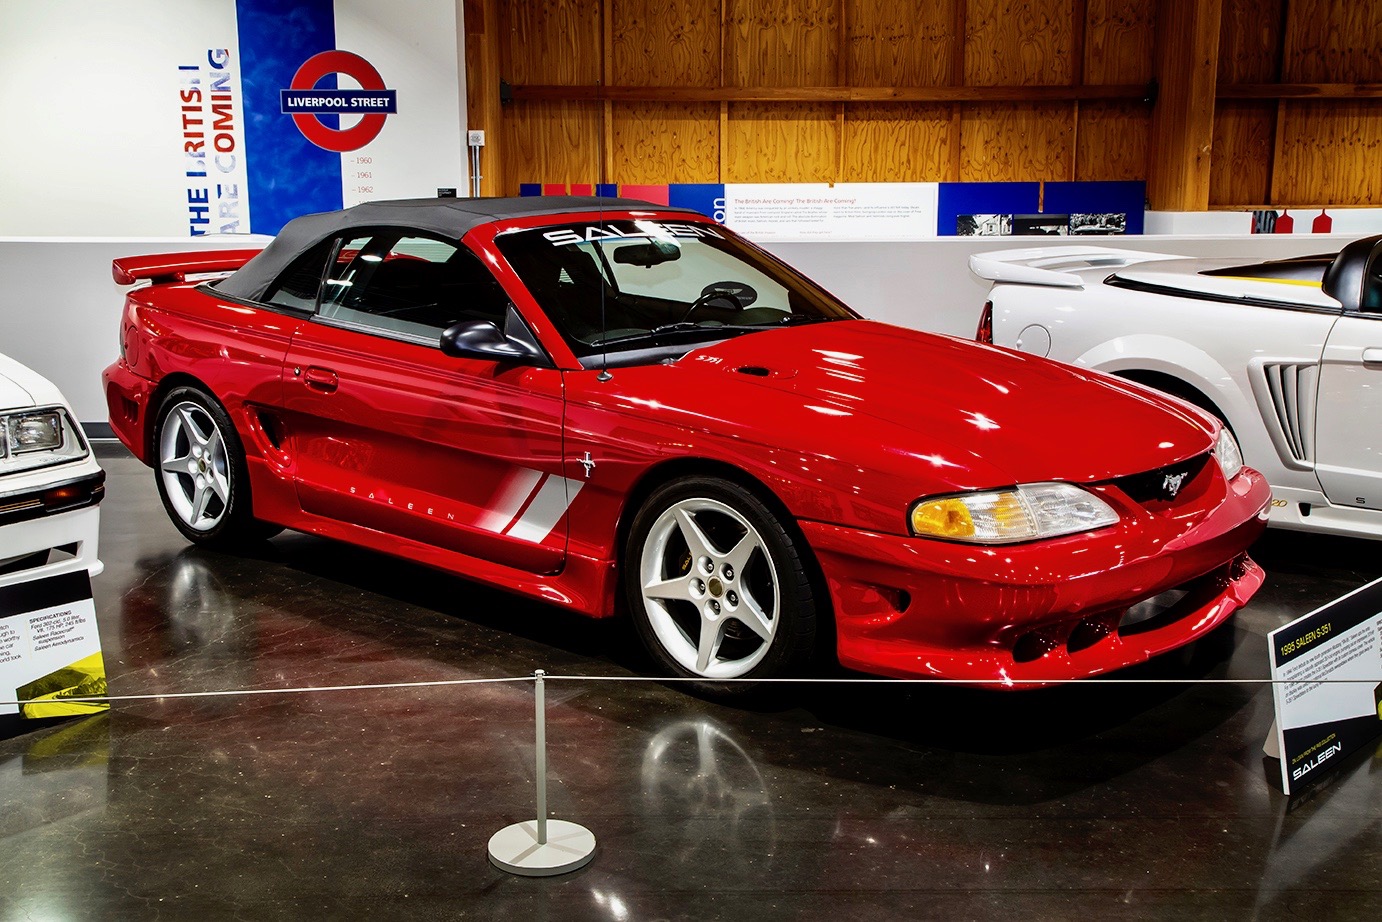 LeMay, LeMay museum salutes Saleen with year-long exhibit, ClassicCars.com Journal